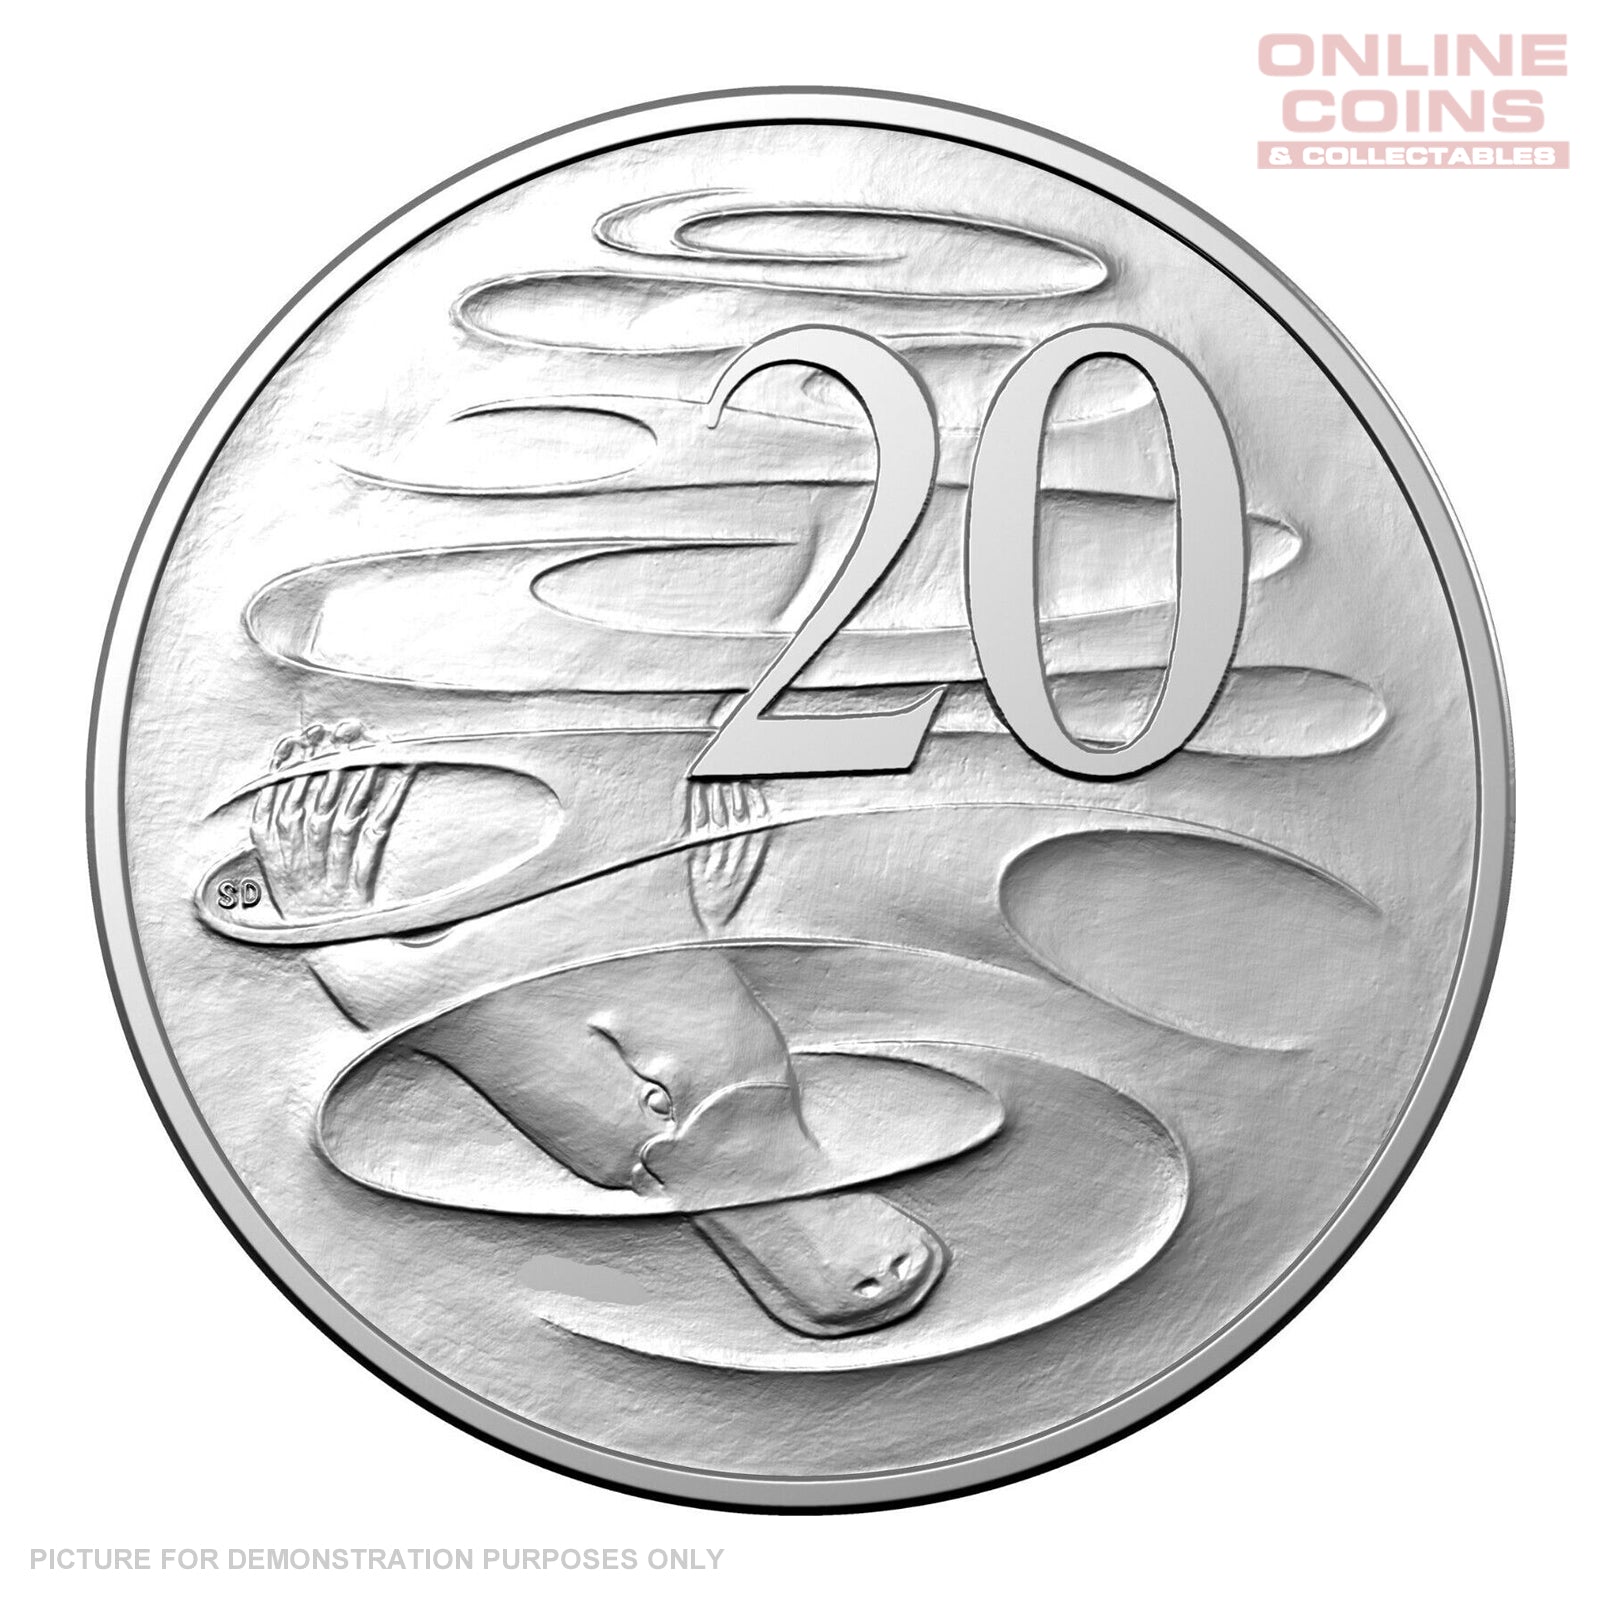 2023 Uncirculated 20c Coin Removed from Mint Set